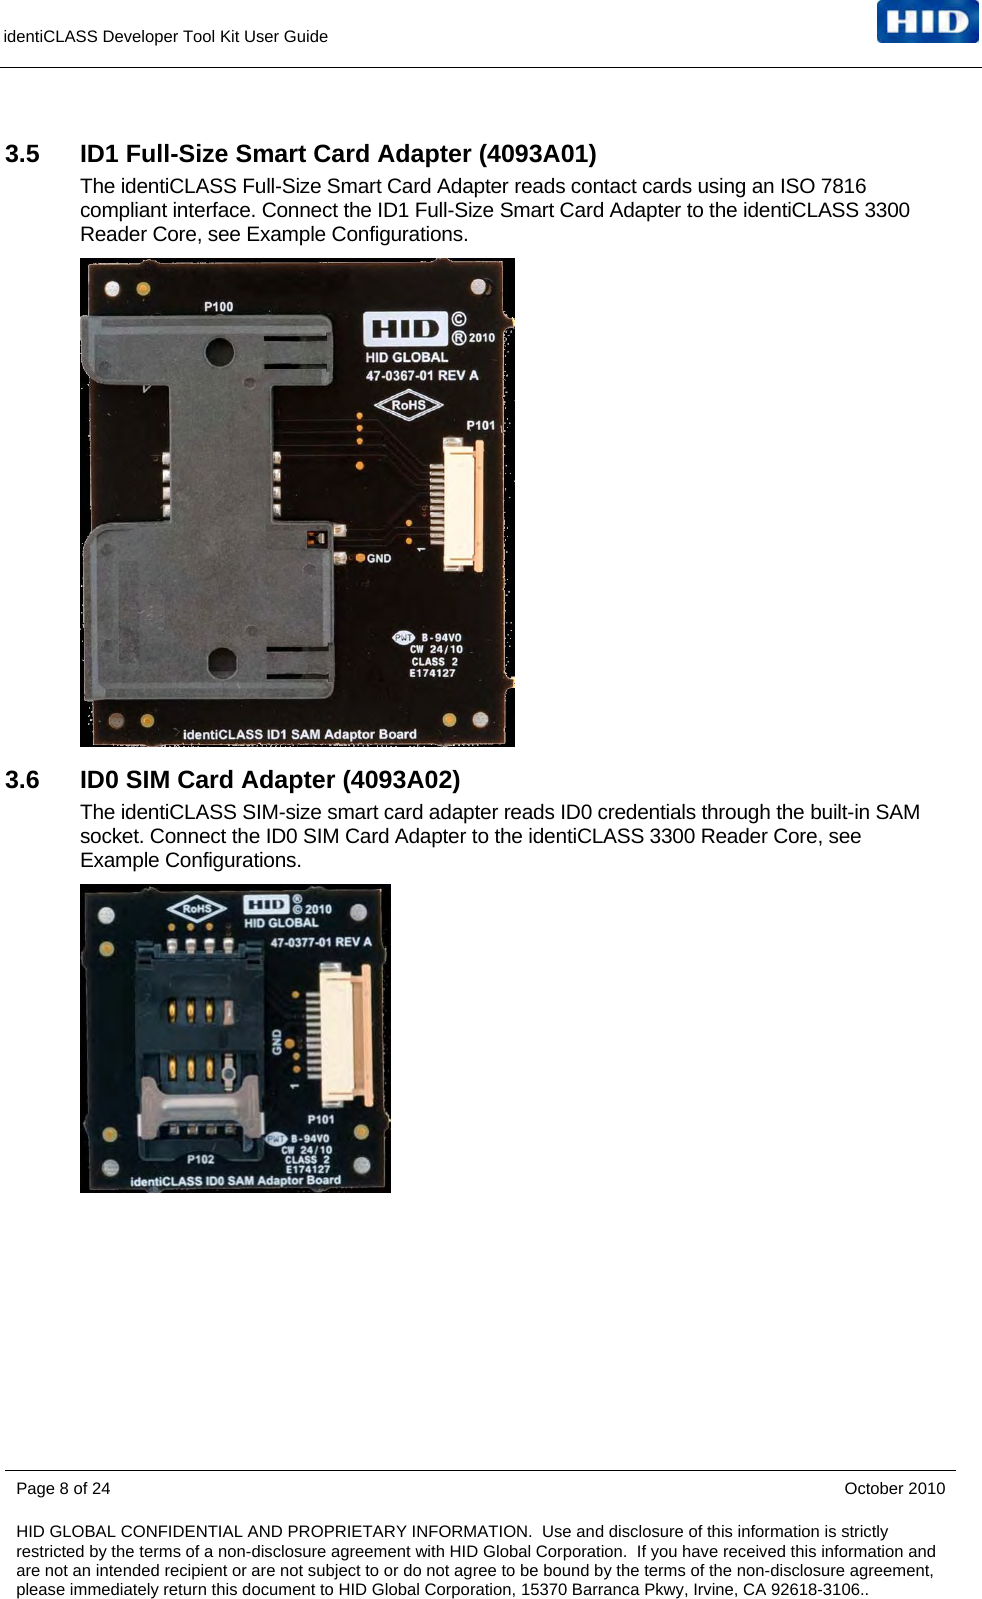 identiCLASS Developer Tool Kit User Guide      3.5  ID1 Full-Size Smart Card Adapter (4093A01) The identiCLASS Full-Size Smart Card Adapter reads contact cards using an ISO 7816 compliant interface. Connect the ID1 Full-Size Smart Card Adapter to the identiCLASS 3300 Reader Core, see Example Configurations.  3.6  ID0 SIM Card Adapter (4093A02) The identiCLASS SIM-size smart card adapter reads ID0 credentials through the built-in SAM socket. Connect the ID0 SIM Card Adapter to the identiCLASS 3300 Reader Core, see Example Configurations.     Page 8 of 24    October 2010 HID GLOBAL CONFIDENTIAL AND PROPRIETARY INFORMATION.  Use and disclosure of this information is strictly restricted by the terms of a non-disclosure agreement with HID Global Corporation.  If you have received this information and are not an intended recipient or are not subject to or do not agree to be bound by the terms of the non-disclosure agreement, please immediately return this document to HID Global Corporation, 15370 Barranca Pkwy, Irvine, CA 92618-3106..  